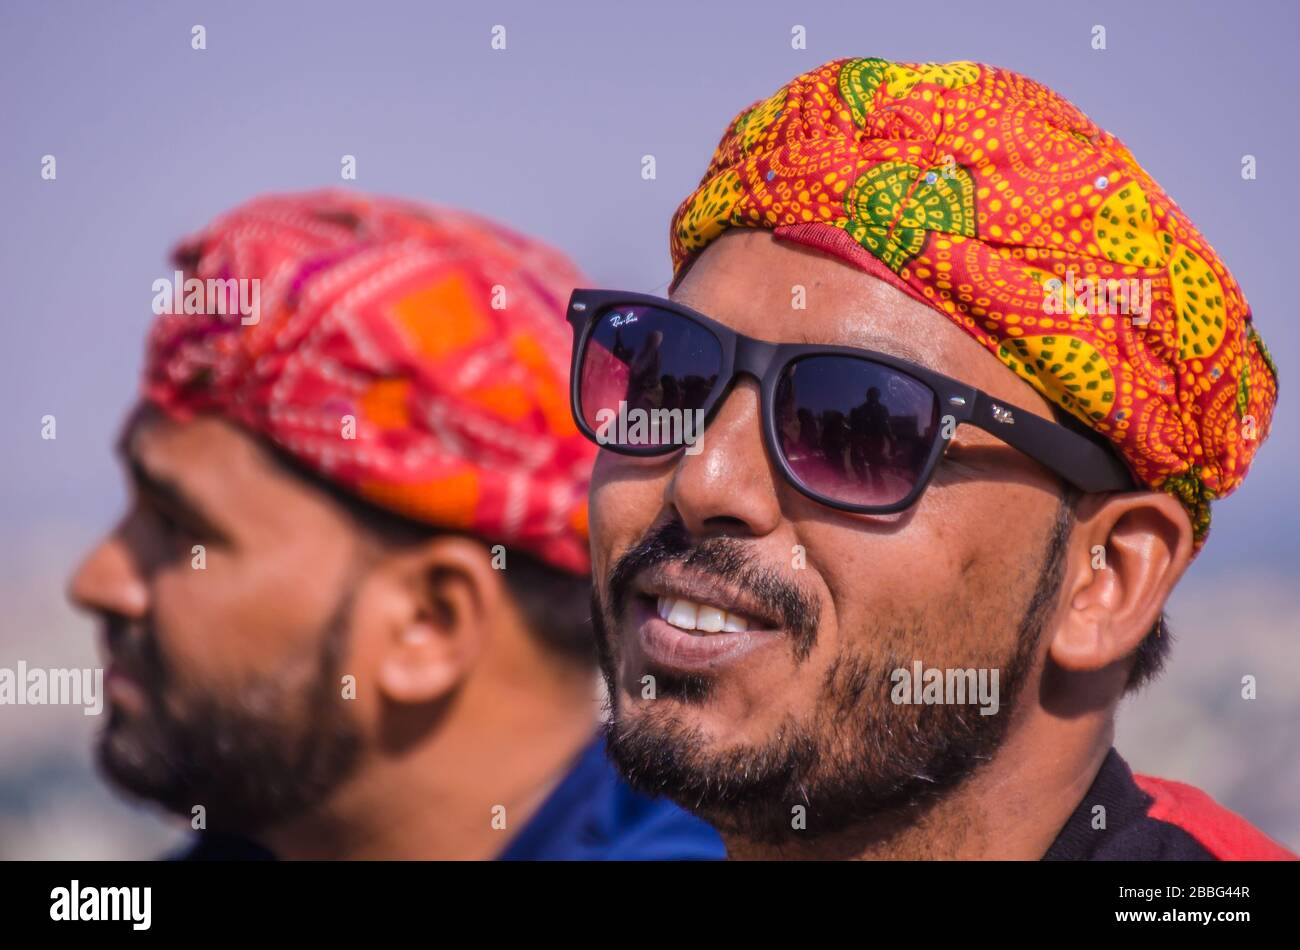 JAISALMER, RAJASTHAN, INDIA – NOV. 29, 2019: Portrait of young tribal men wearing traditional colorful turban in Jaisalmer Fort, Rajasthan, India, Stock Photo